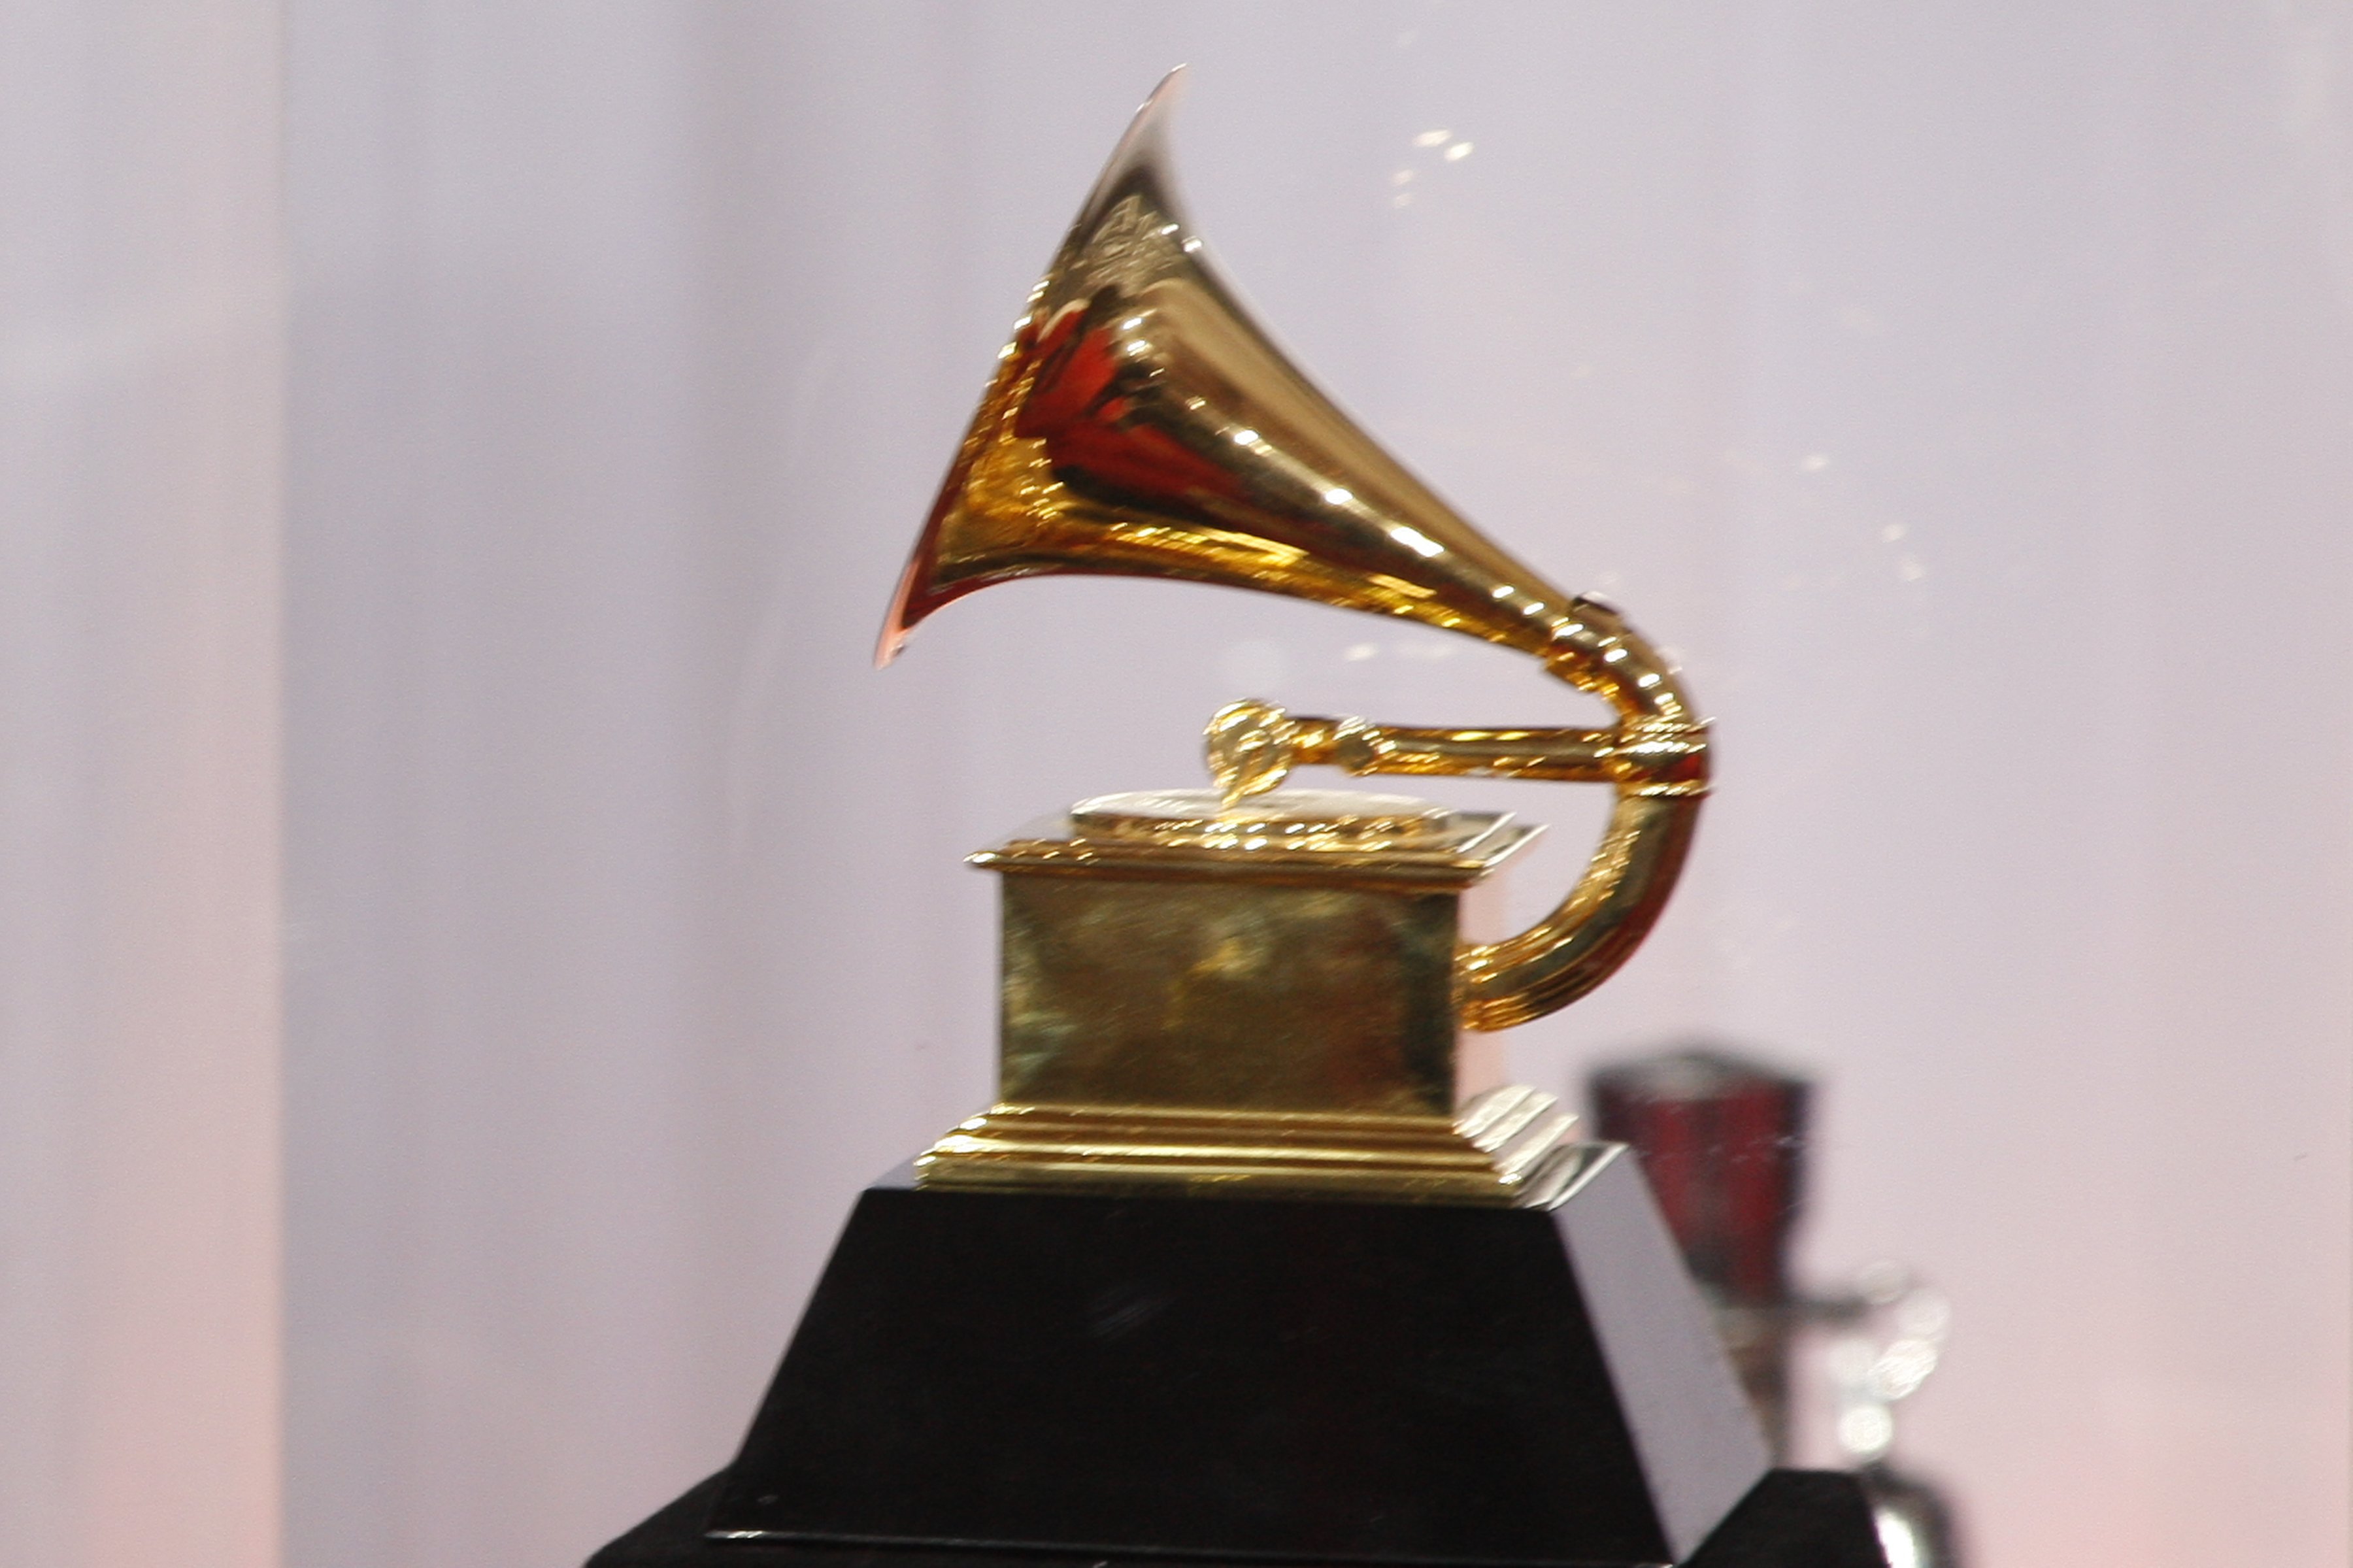 Grammy statue at the 52nd Annual Grammy Awards held at the Nokia Theater on January 31, 2010 in Los Angeles, California | Photo: Shutterstock